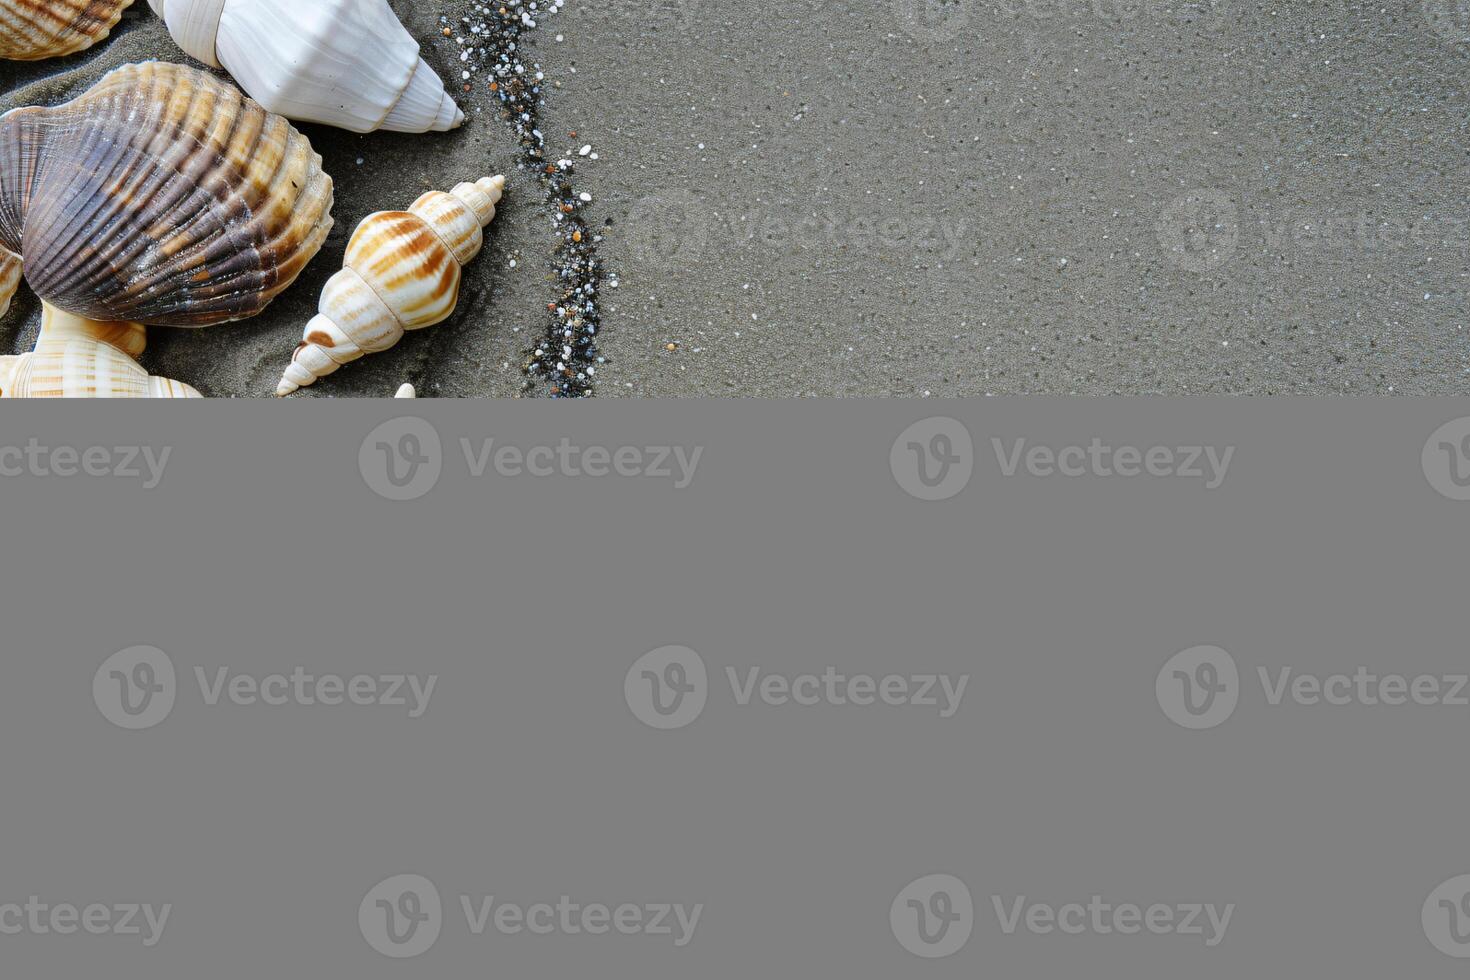 photo copy space sand with shells and starfish